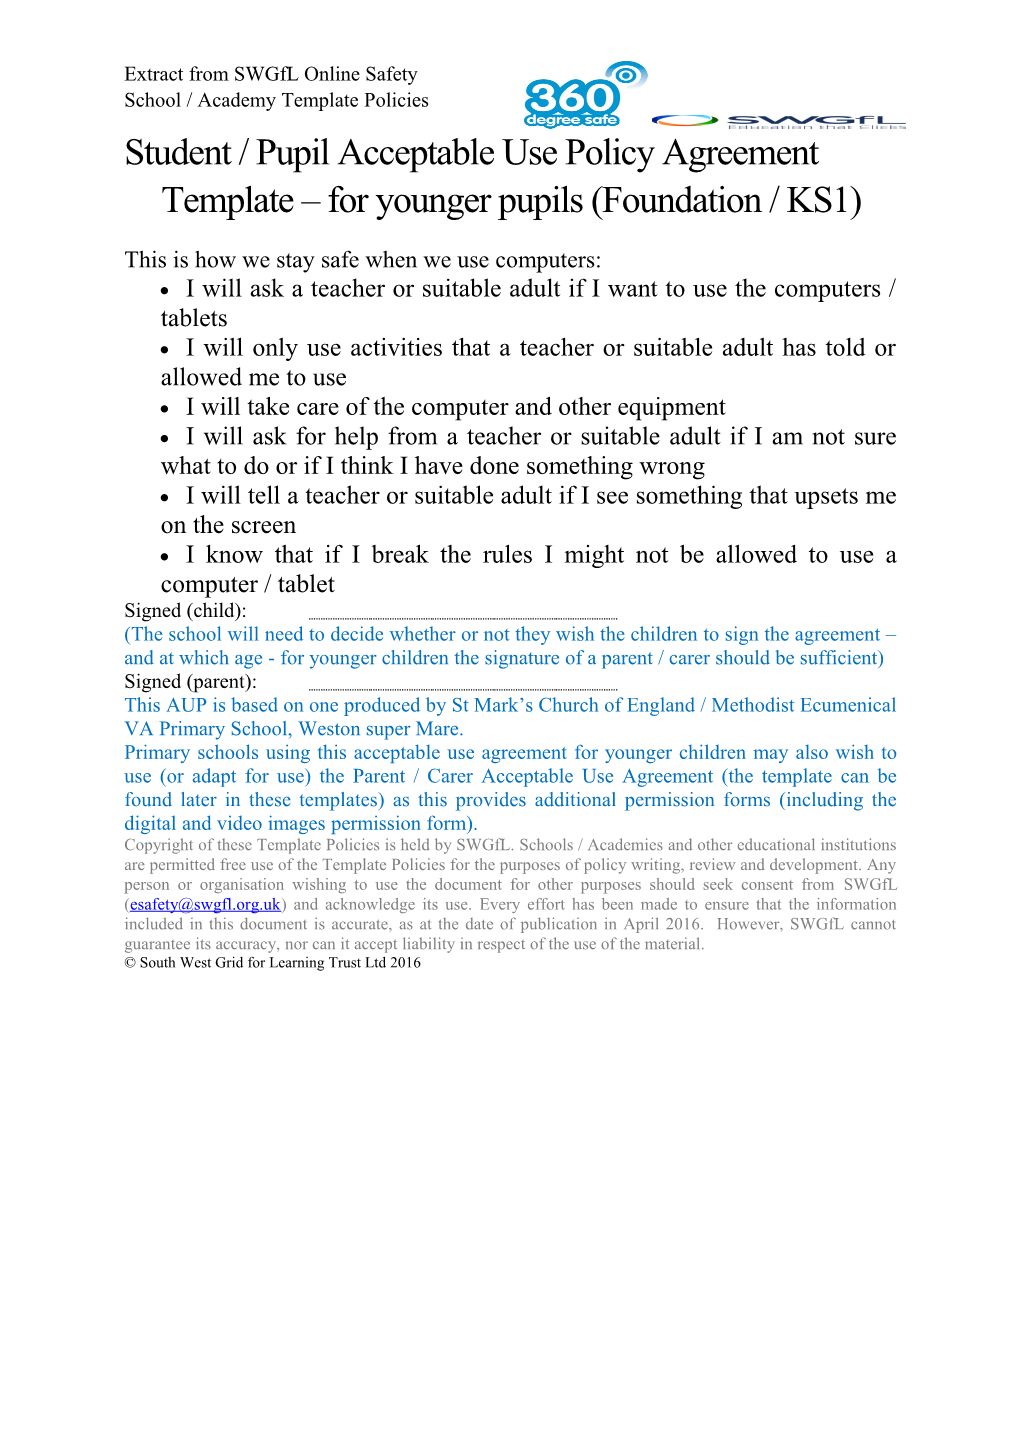 Student / Pupil Acceptable Use Policy Agreement Template for Younger Pupils (Foundation / KS1)